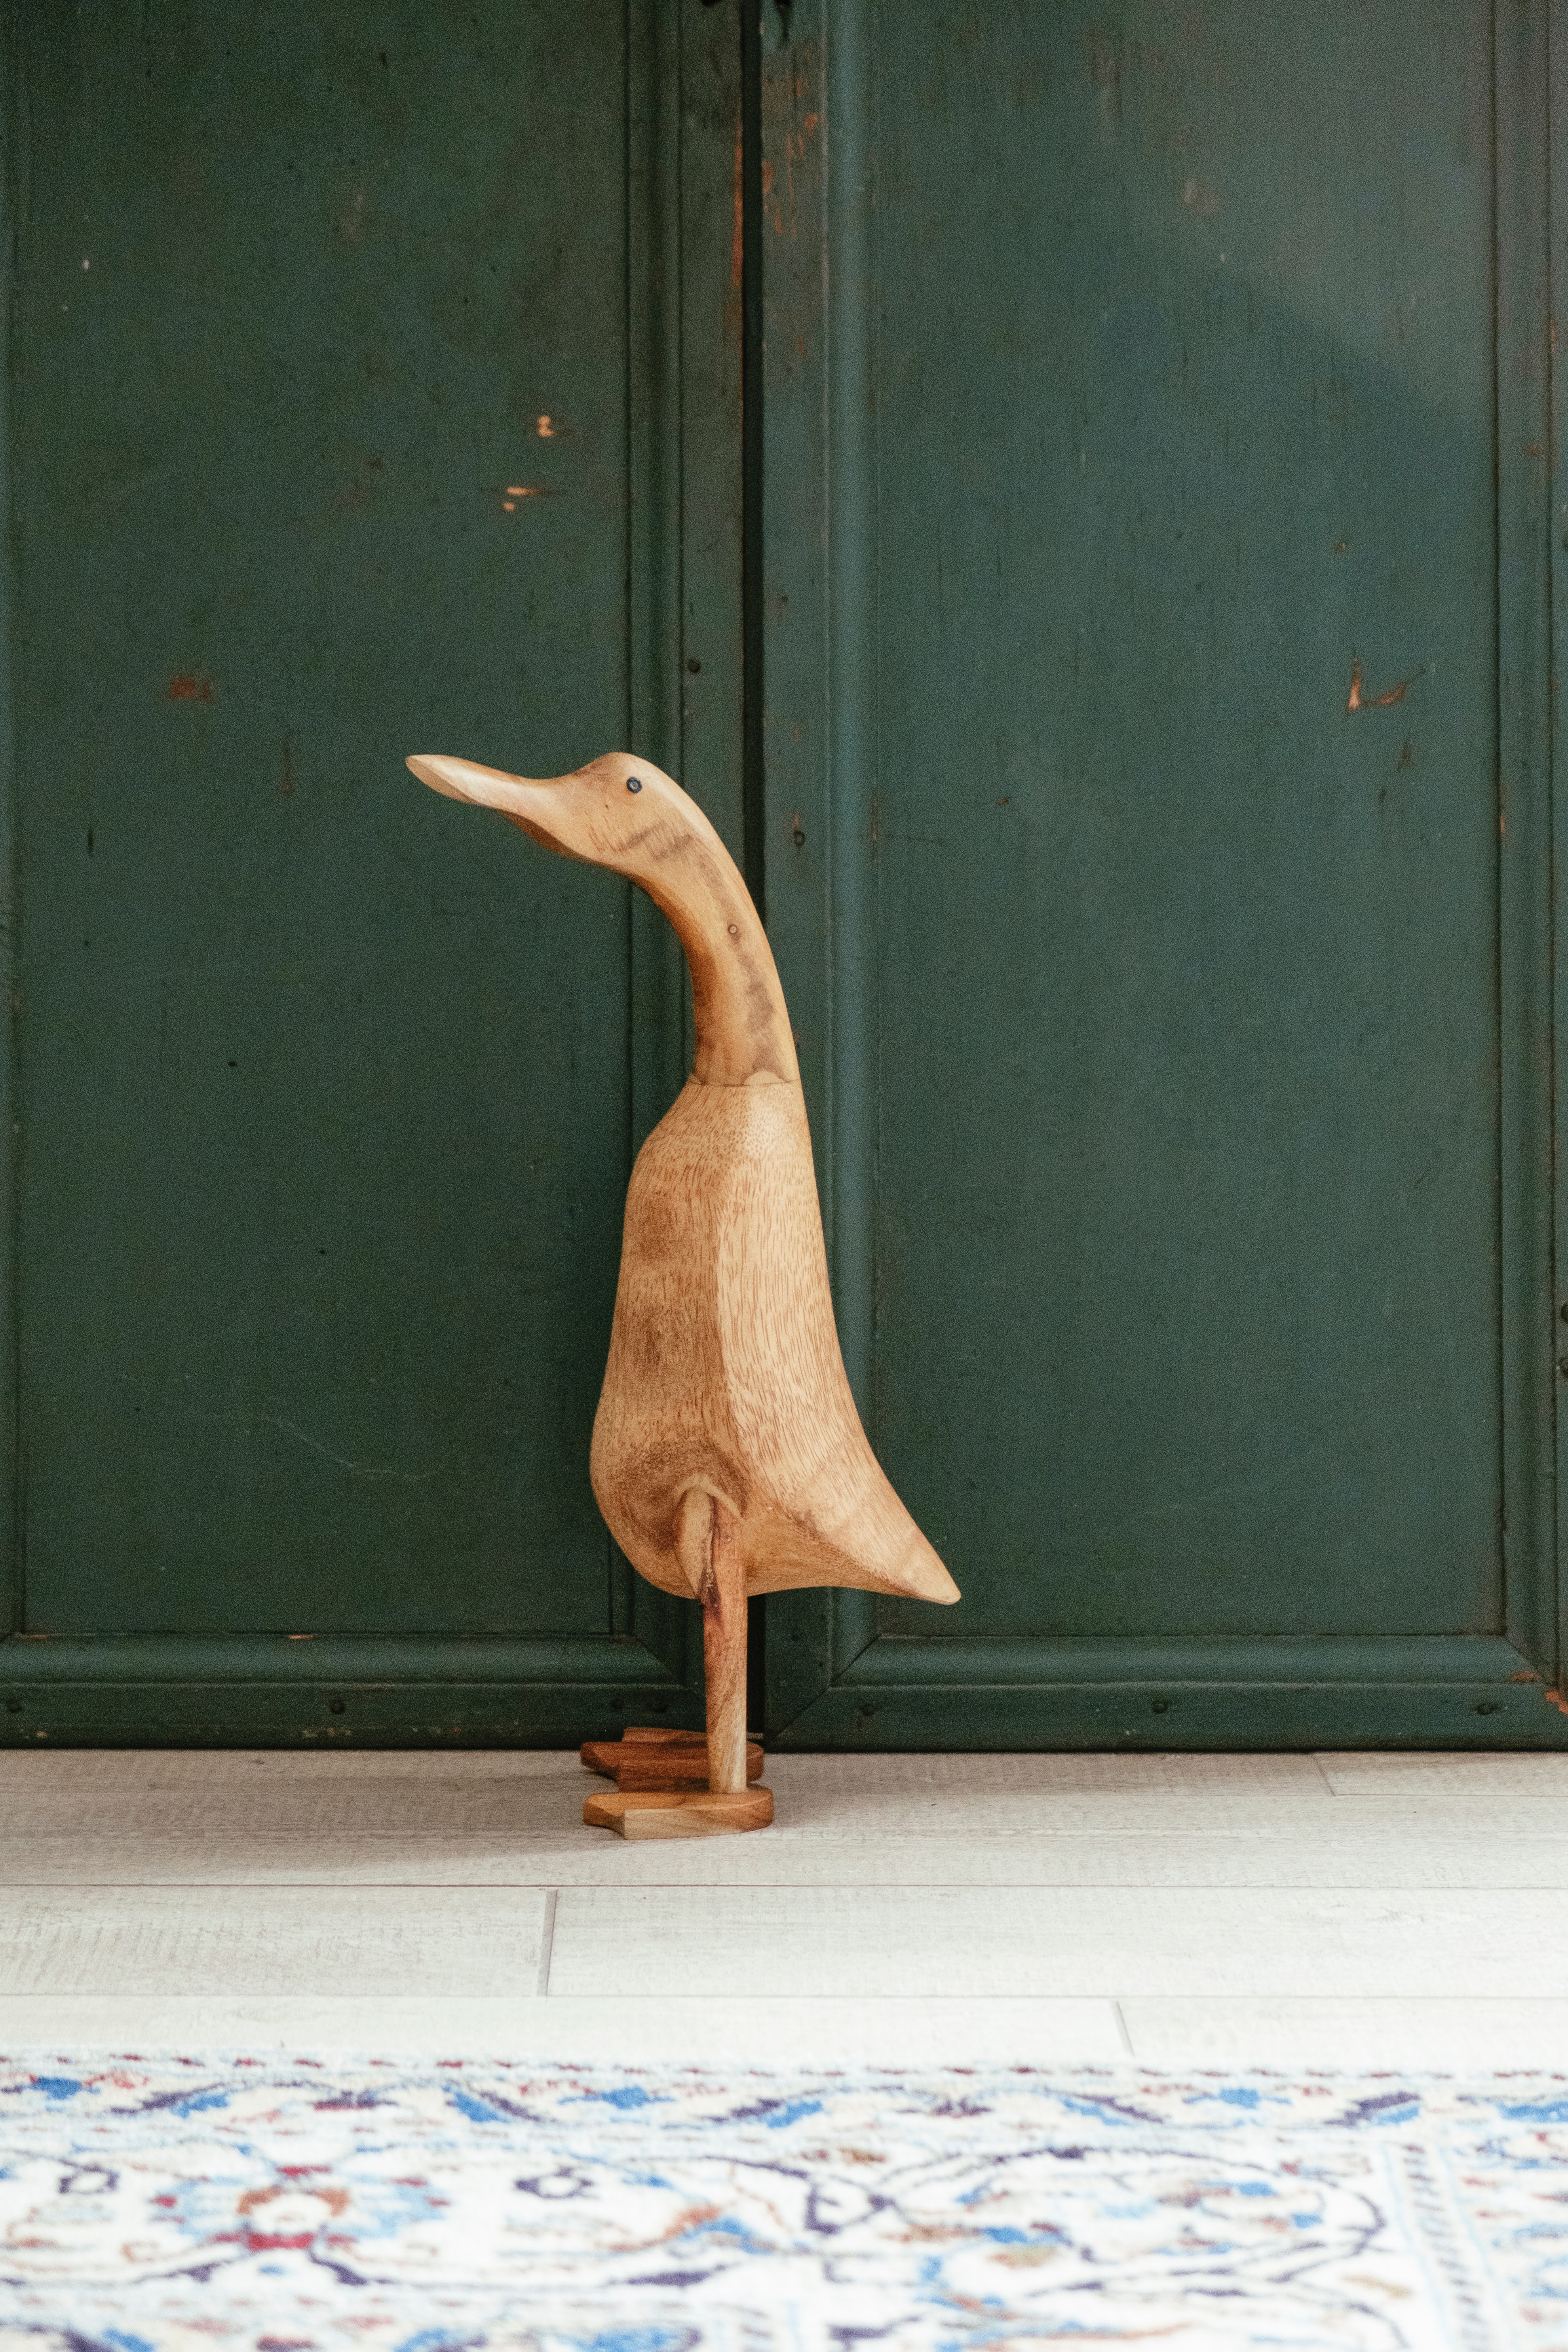 Image of a wooden duck sculpture with a green background.